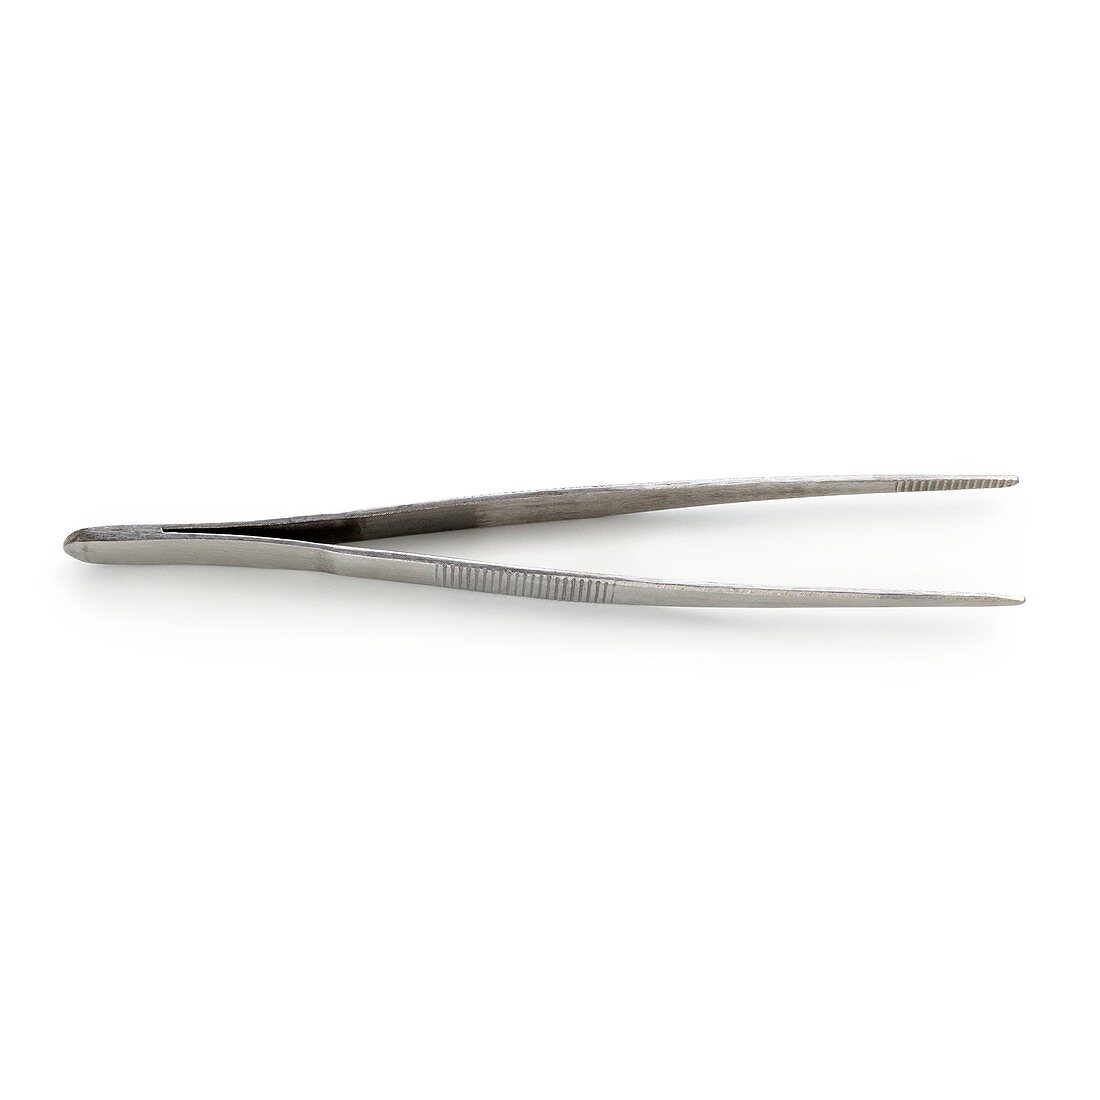 Blunt-pointed forceps